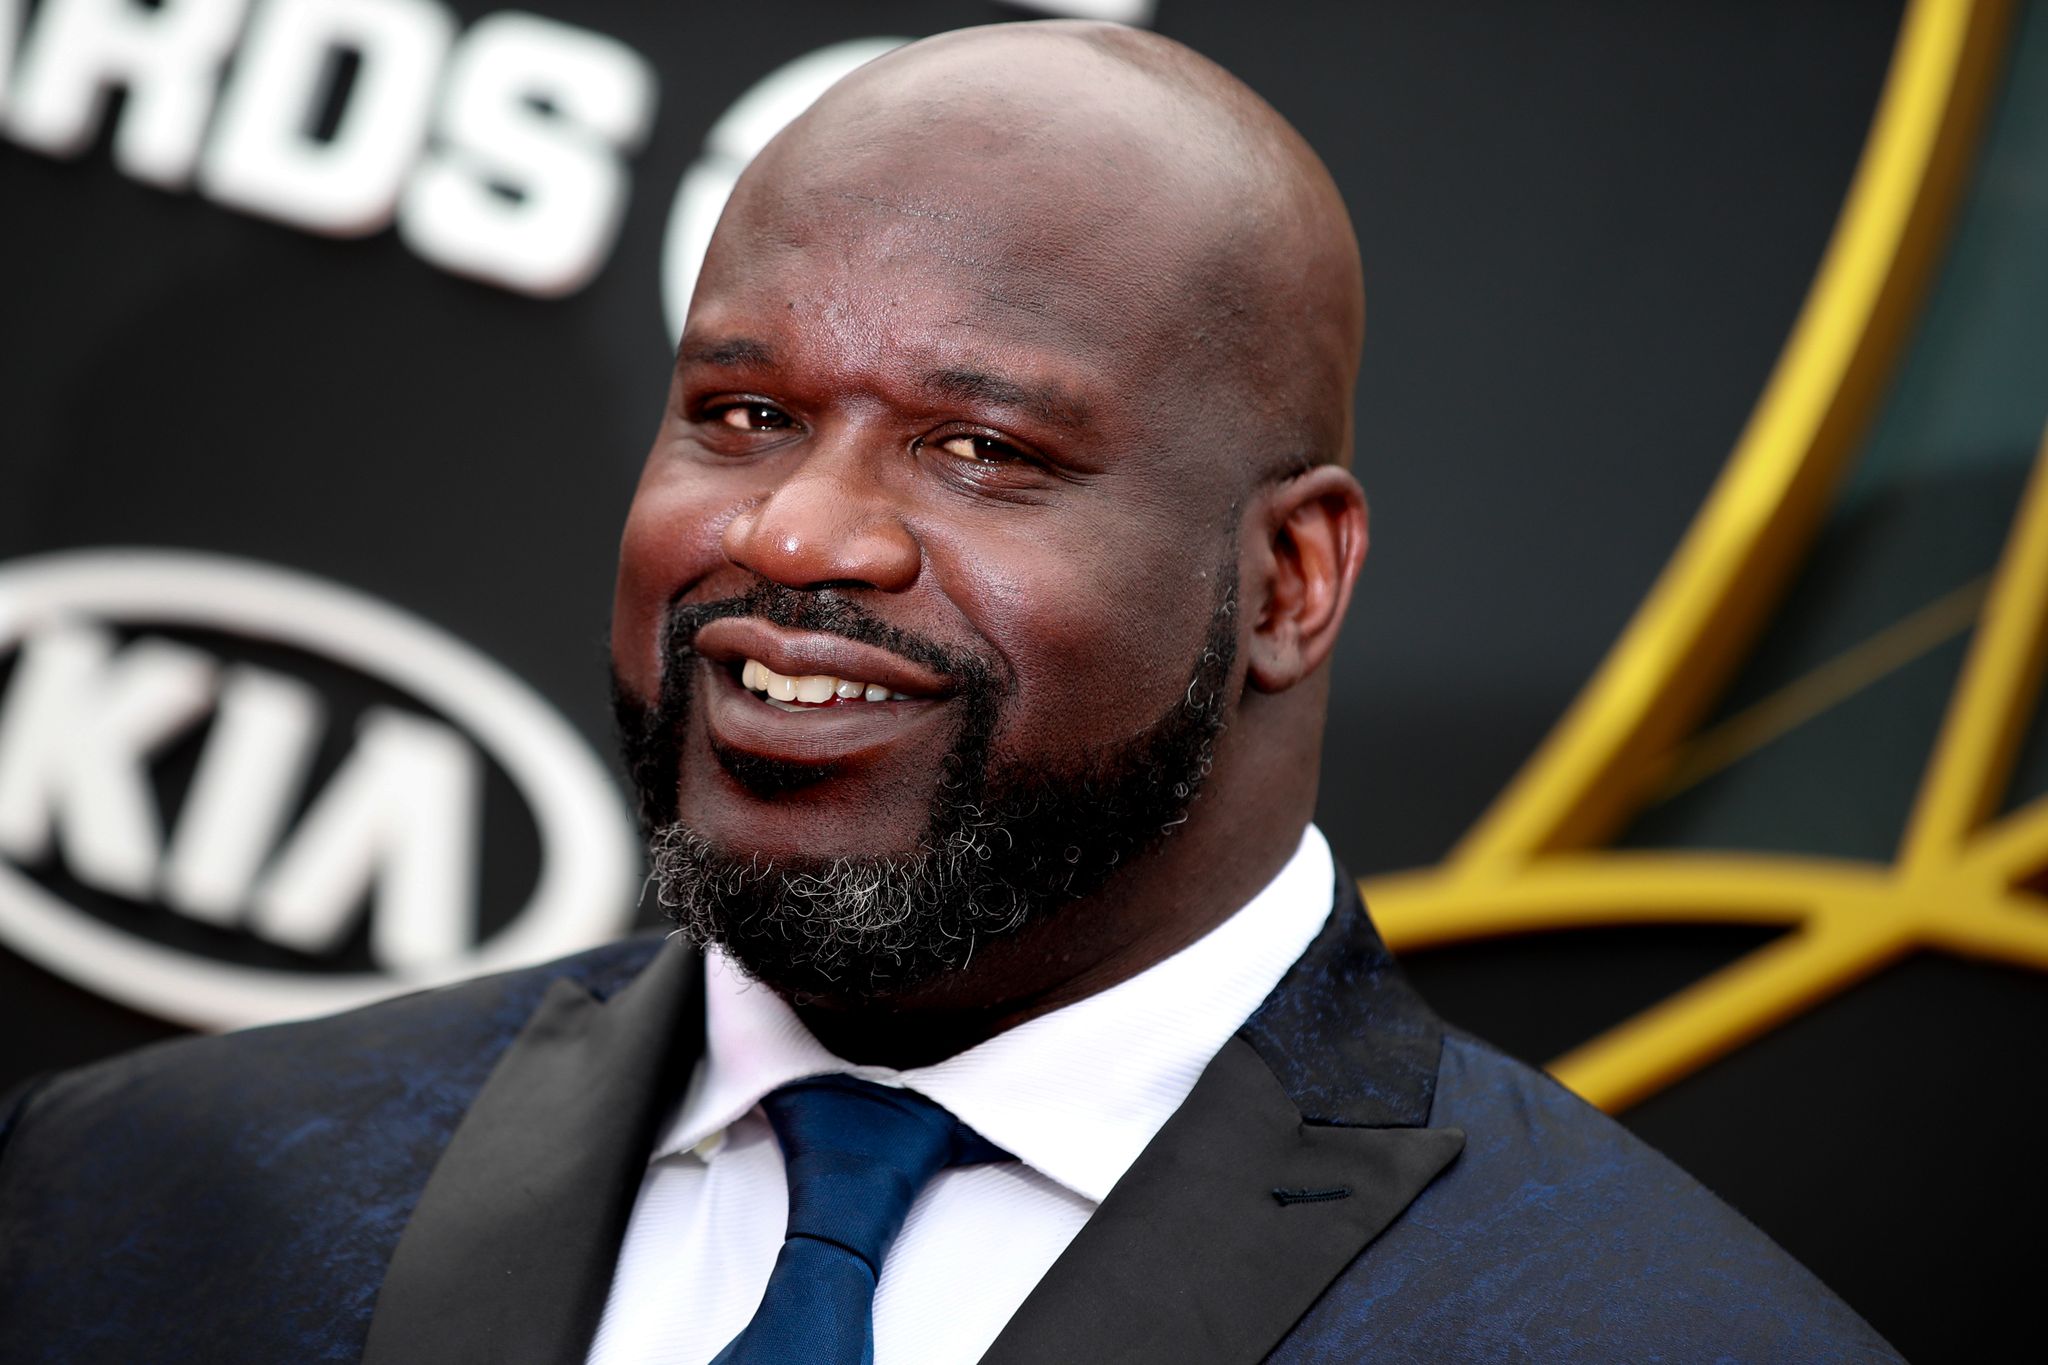 Shaquille O'Neal attends the 2019 NBA Awards at Barker Hangar on June 24, 2019 in Santa Monica, California | Photo: Getty Images